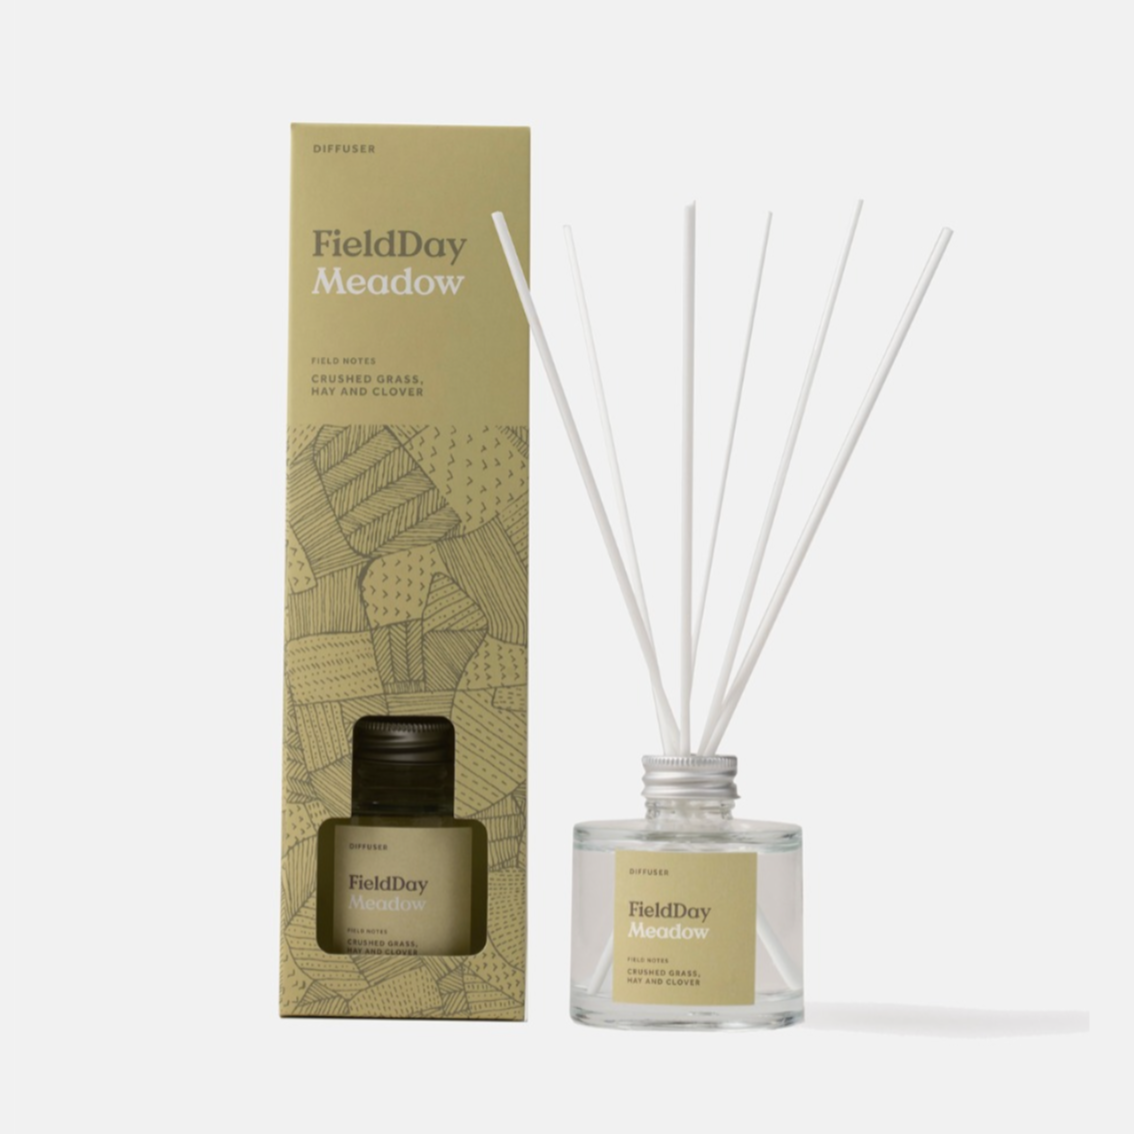 meadow diffuser by field day